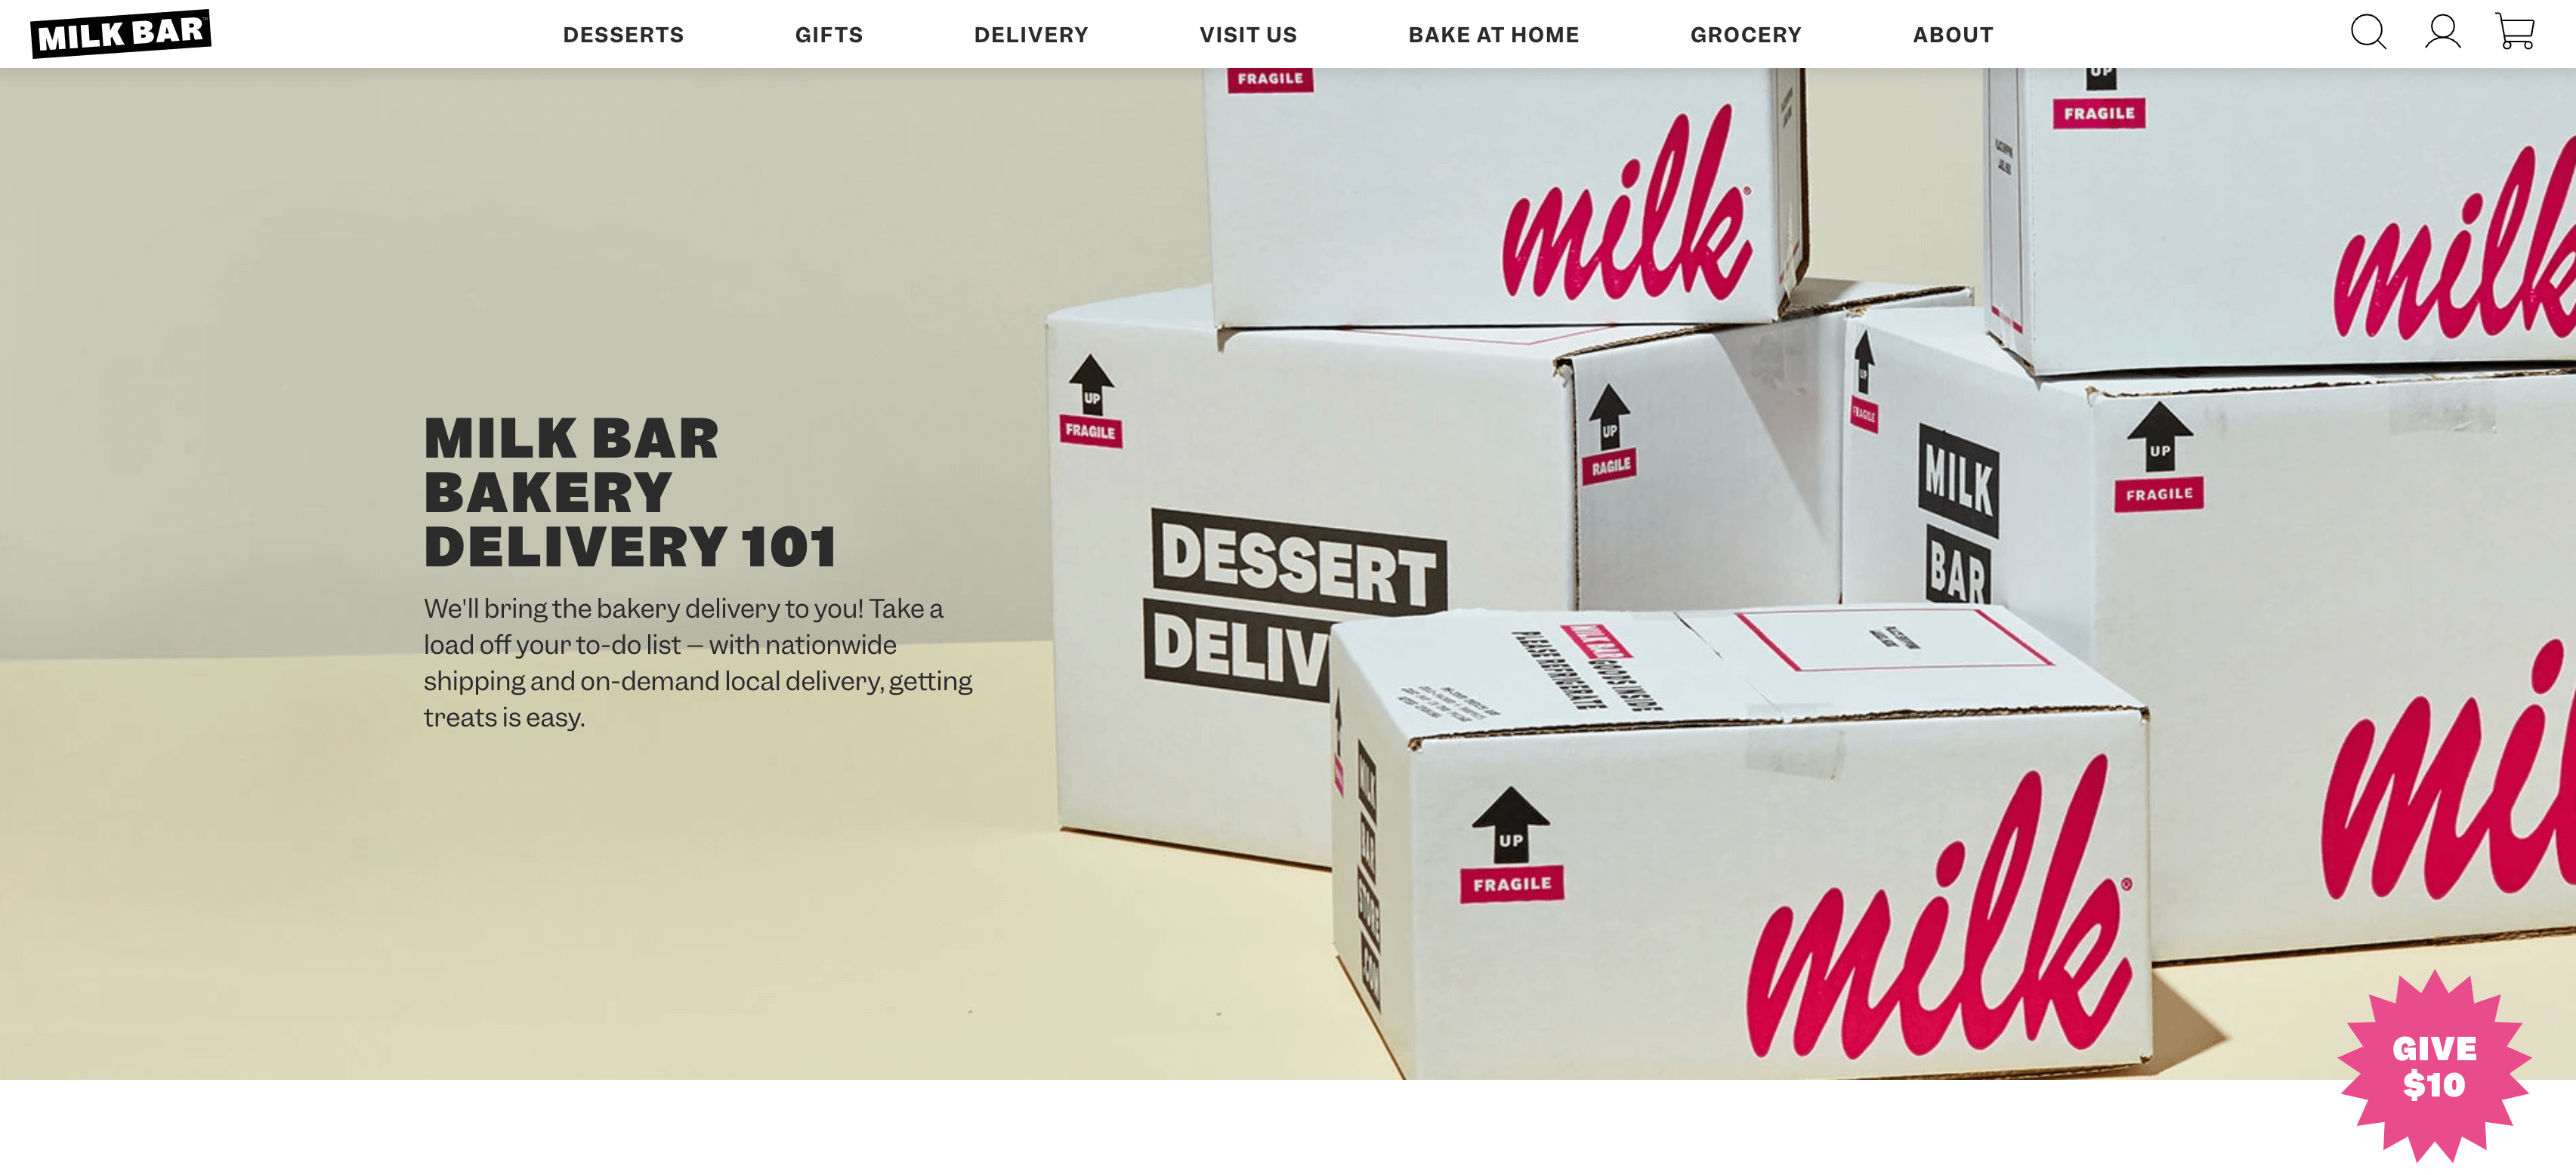 Milkbar's delivery page featuring a hero image of their branded delivery boxes